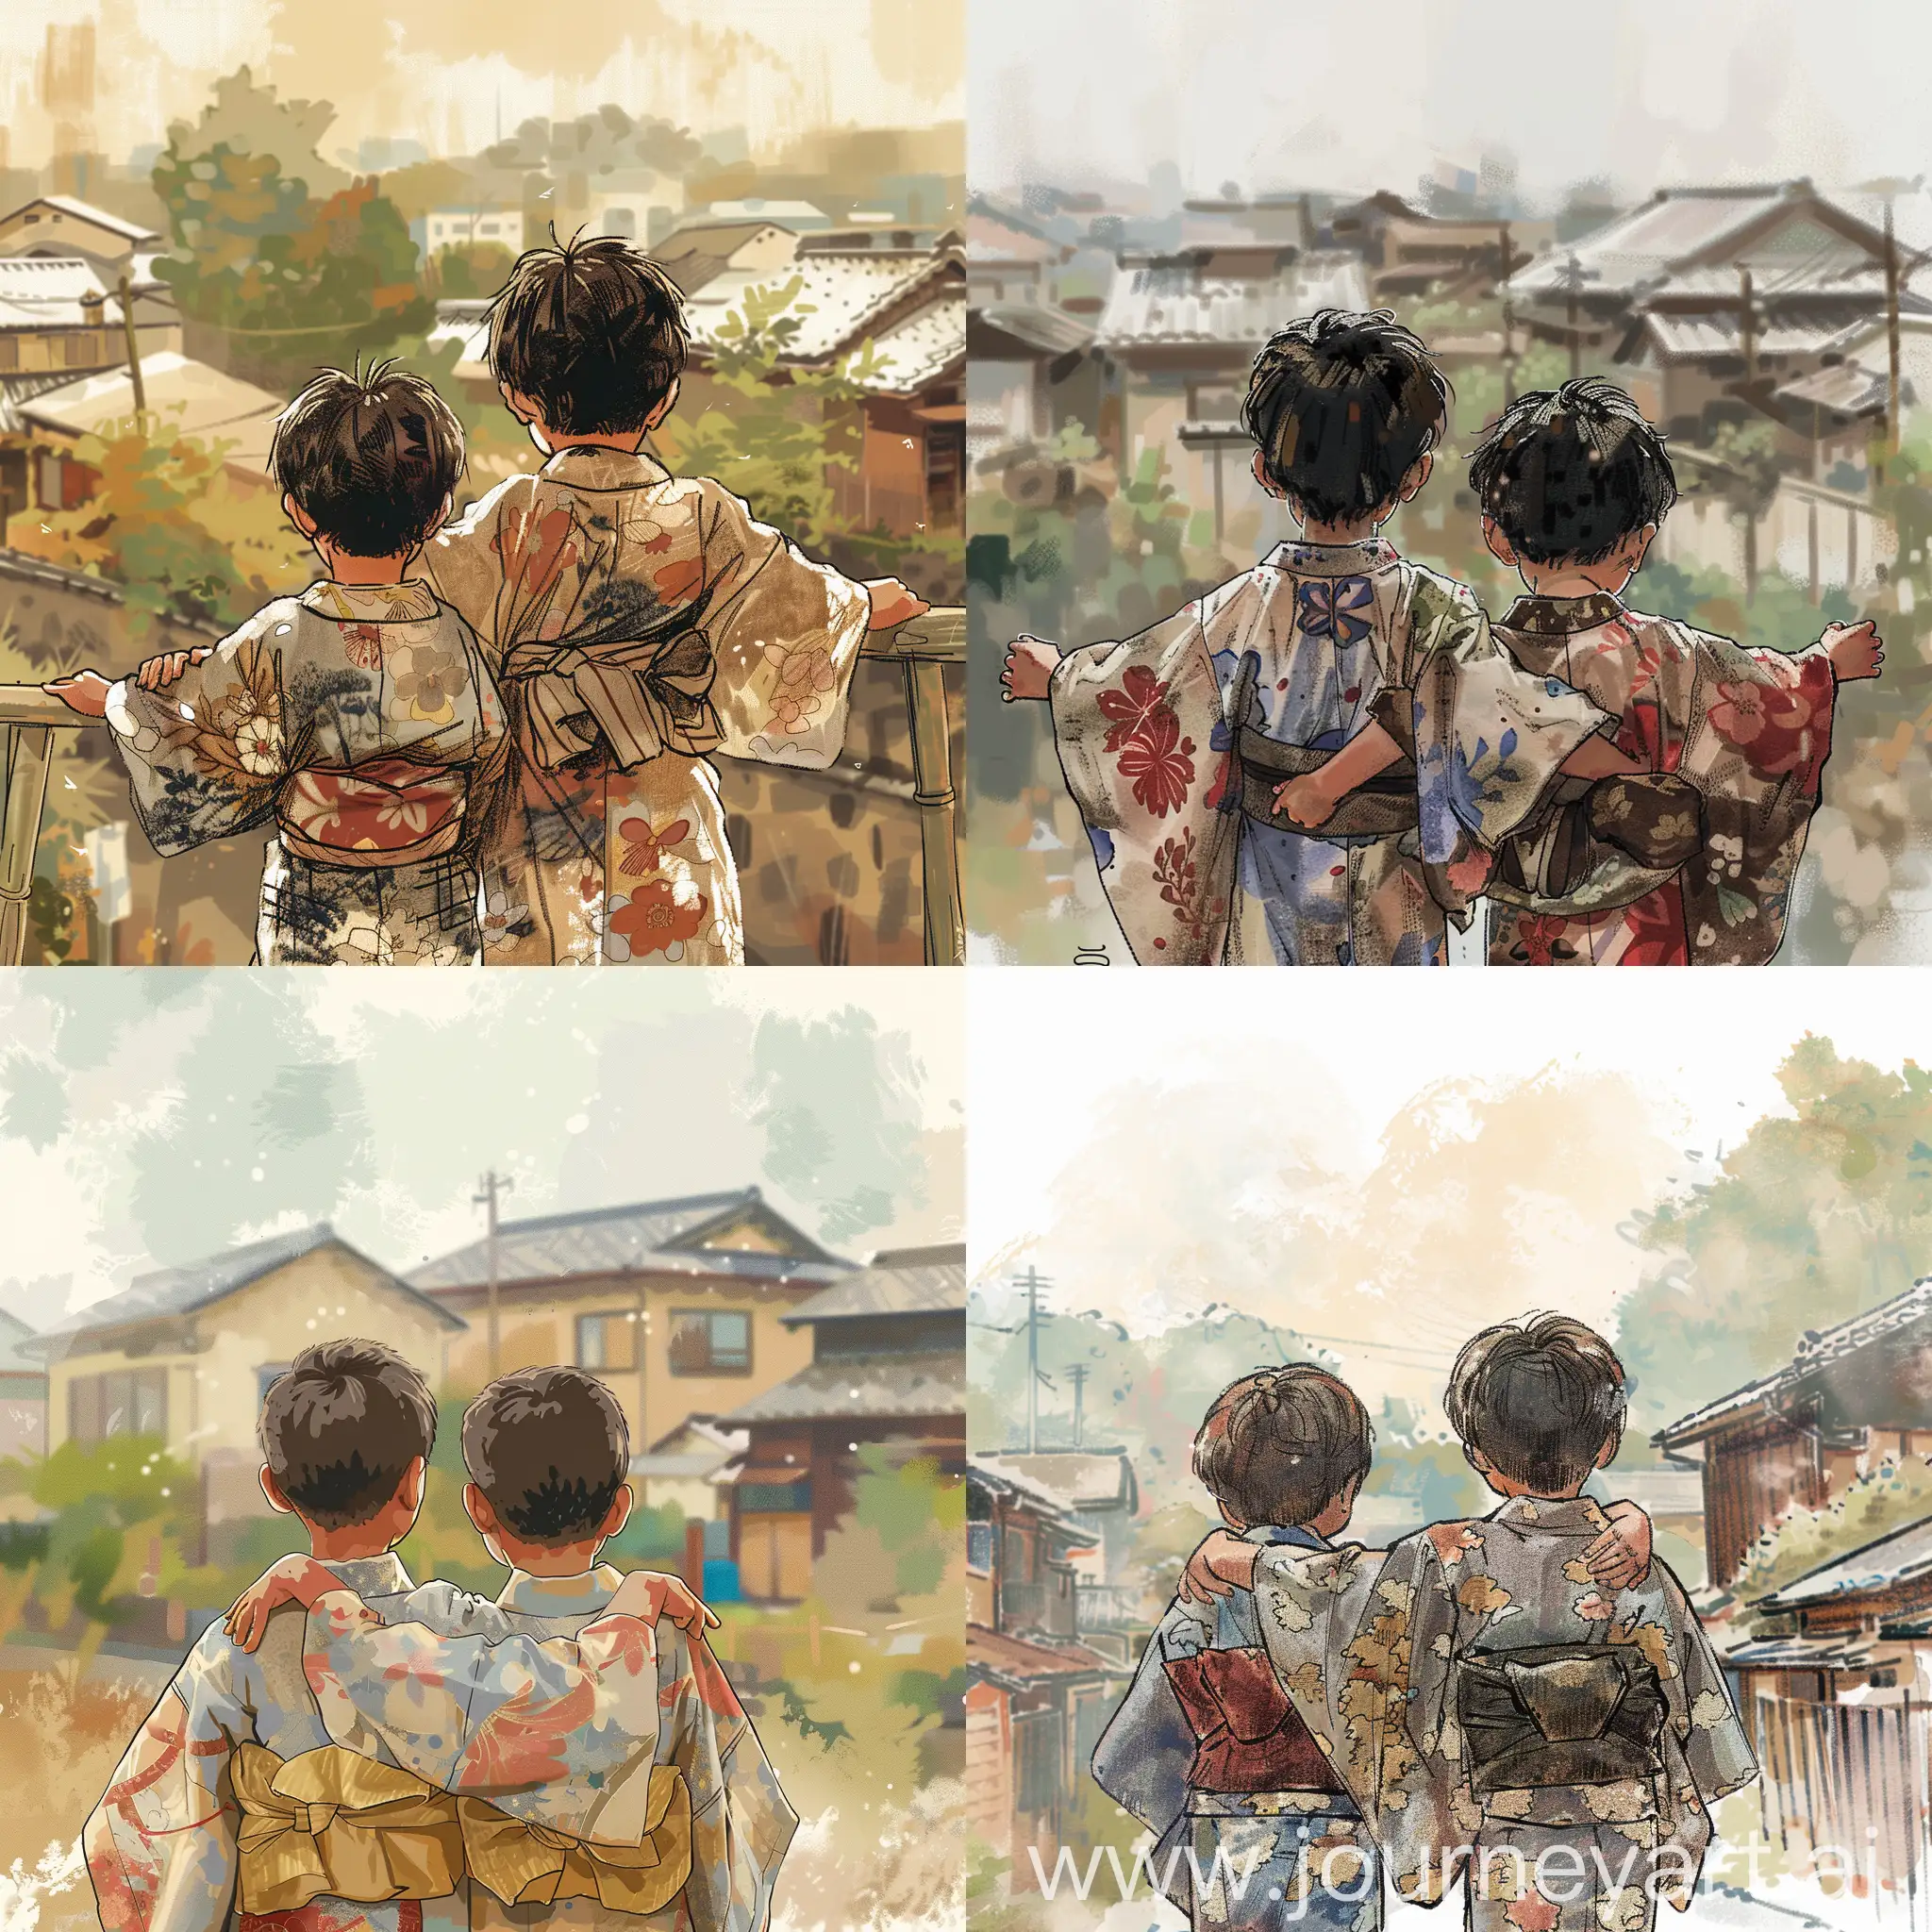 Two boys Japanese children in worn kimonos looking ahead ((put arms around each other's shoulders)) (zoom in). Illustrated stories Japan and Japan has a rich tradition of storytelling, and we'll explore the world of manga, Japanese comic books, and whimsical illustrations. Create a collaborative story that incorporates elements of these artistic styles. Background Japanese rural neighborhood blur

